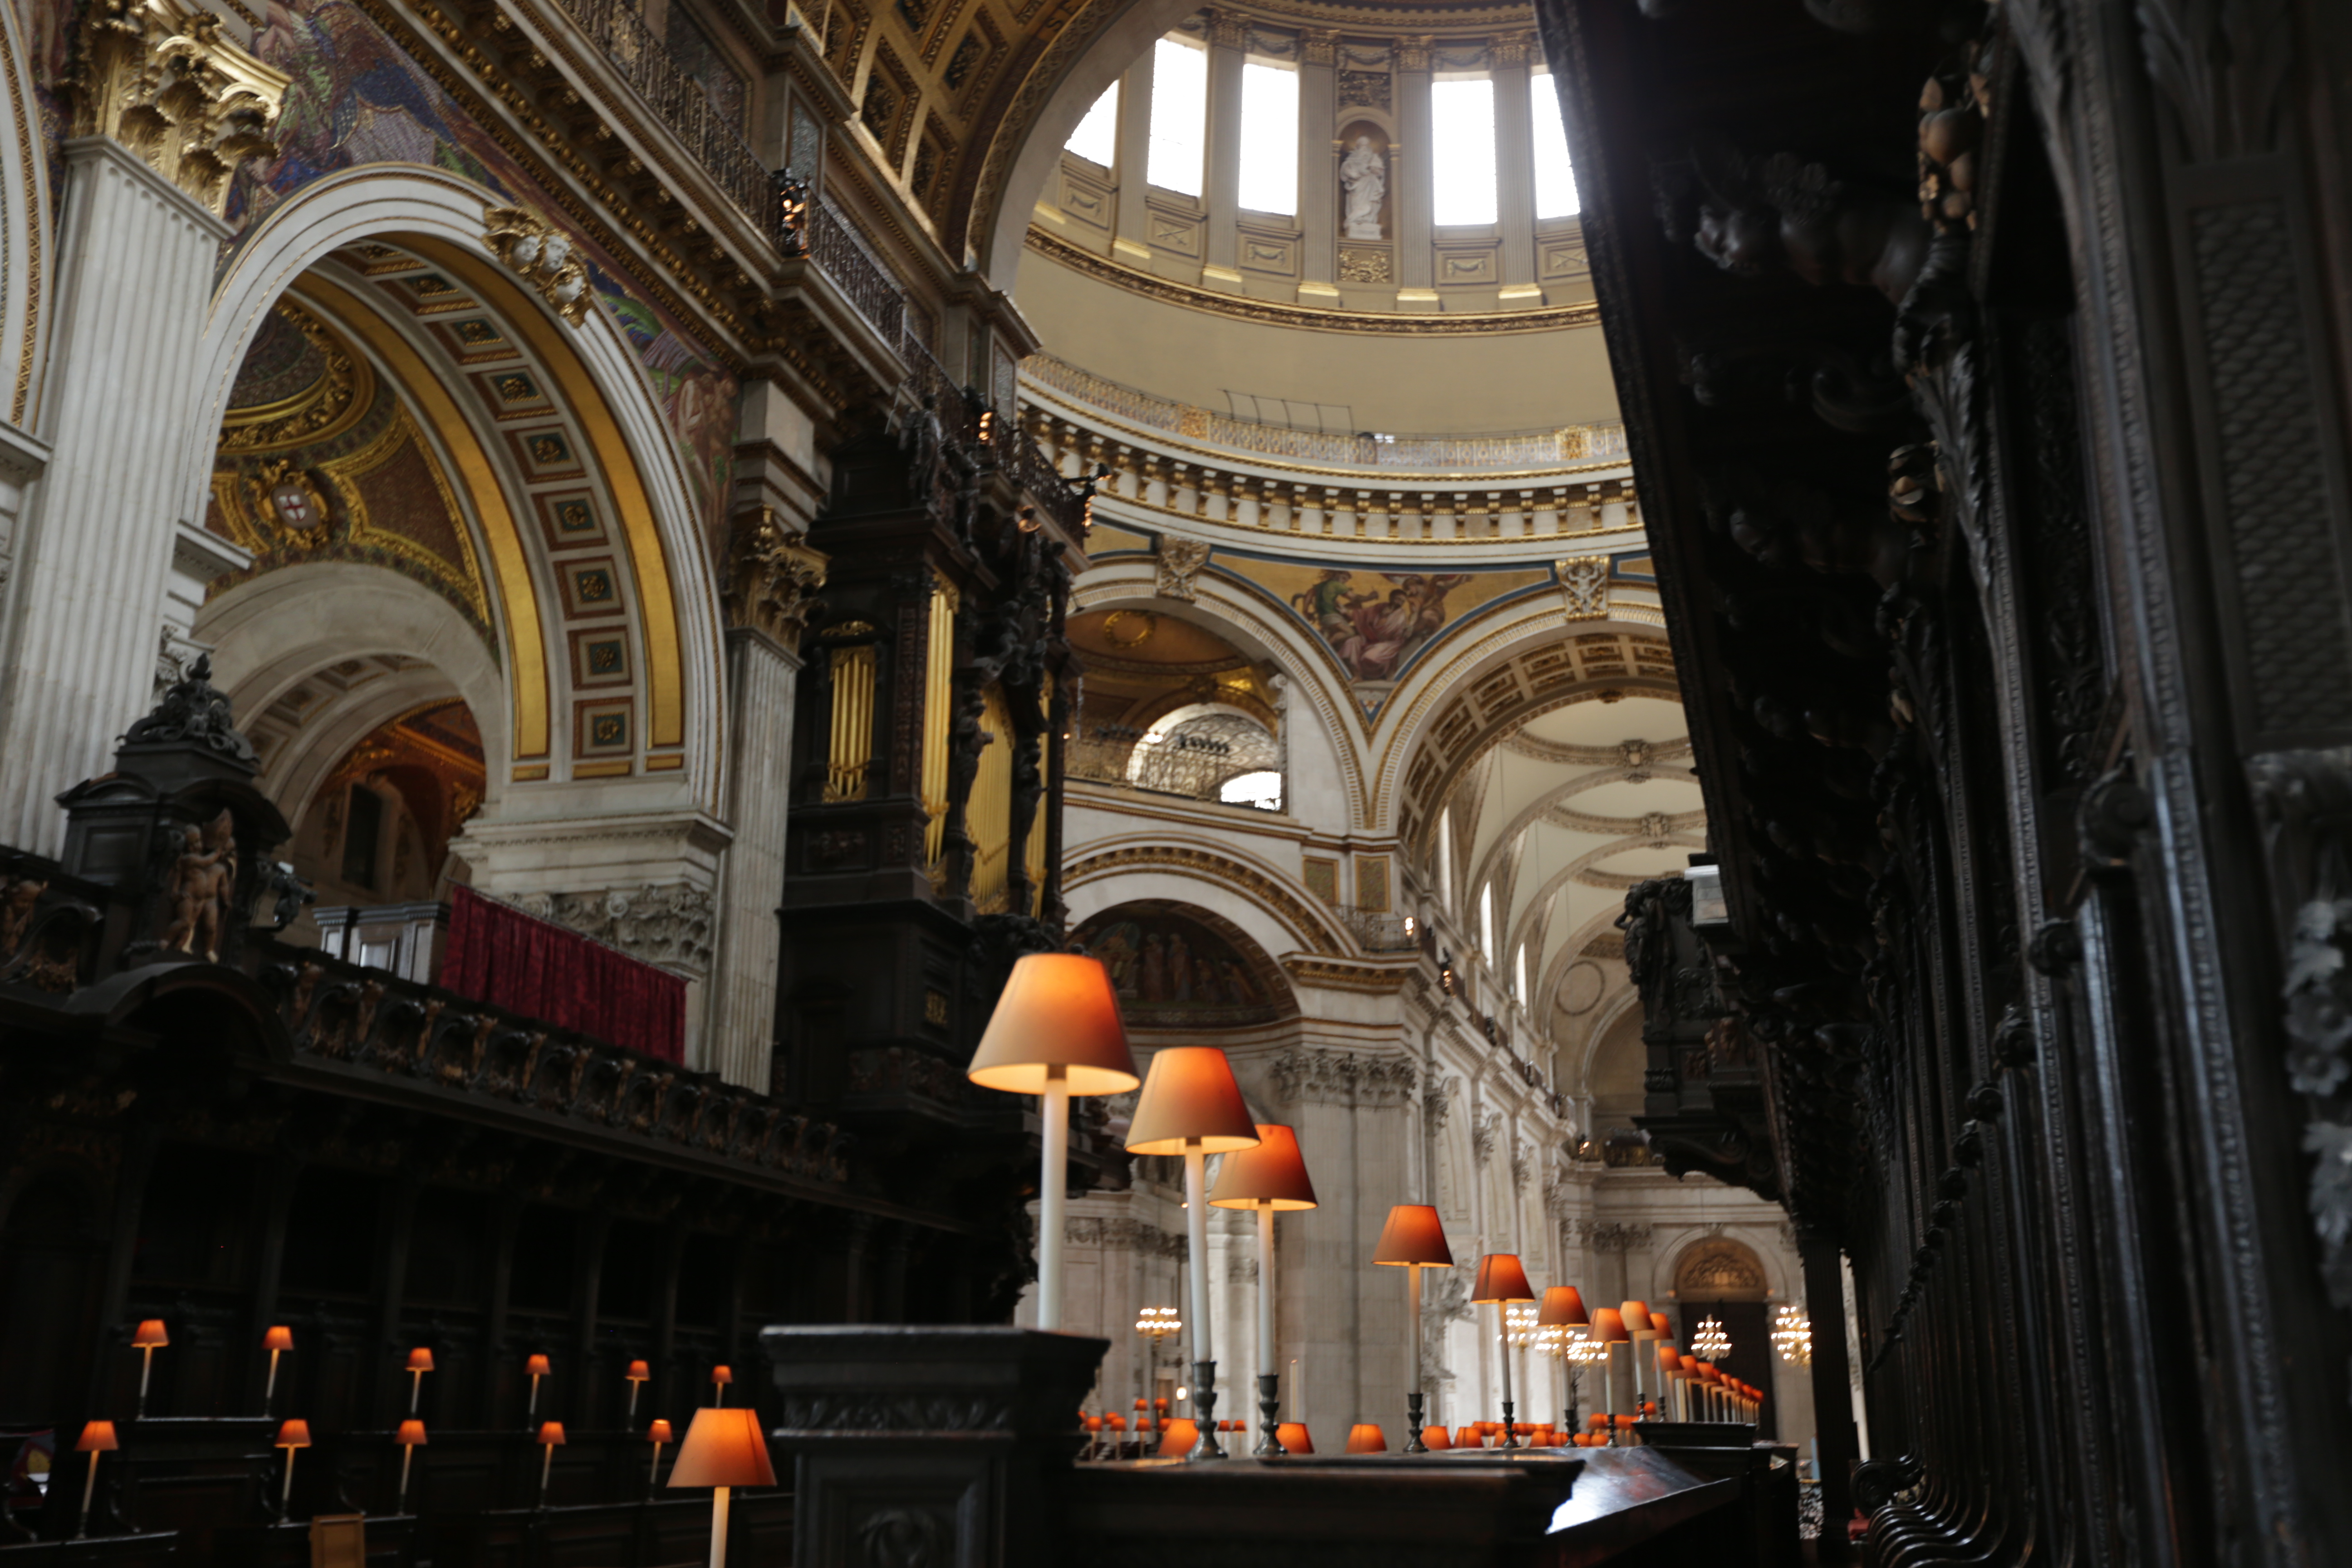 An image of the lamps in the Quire